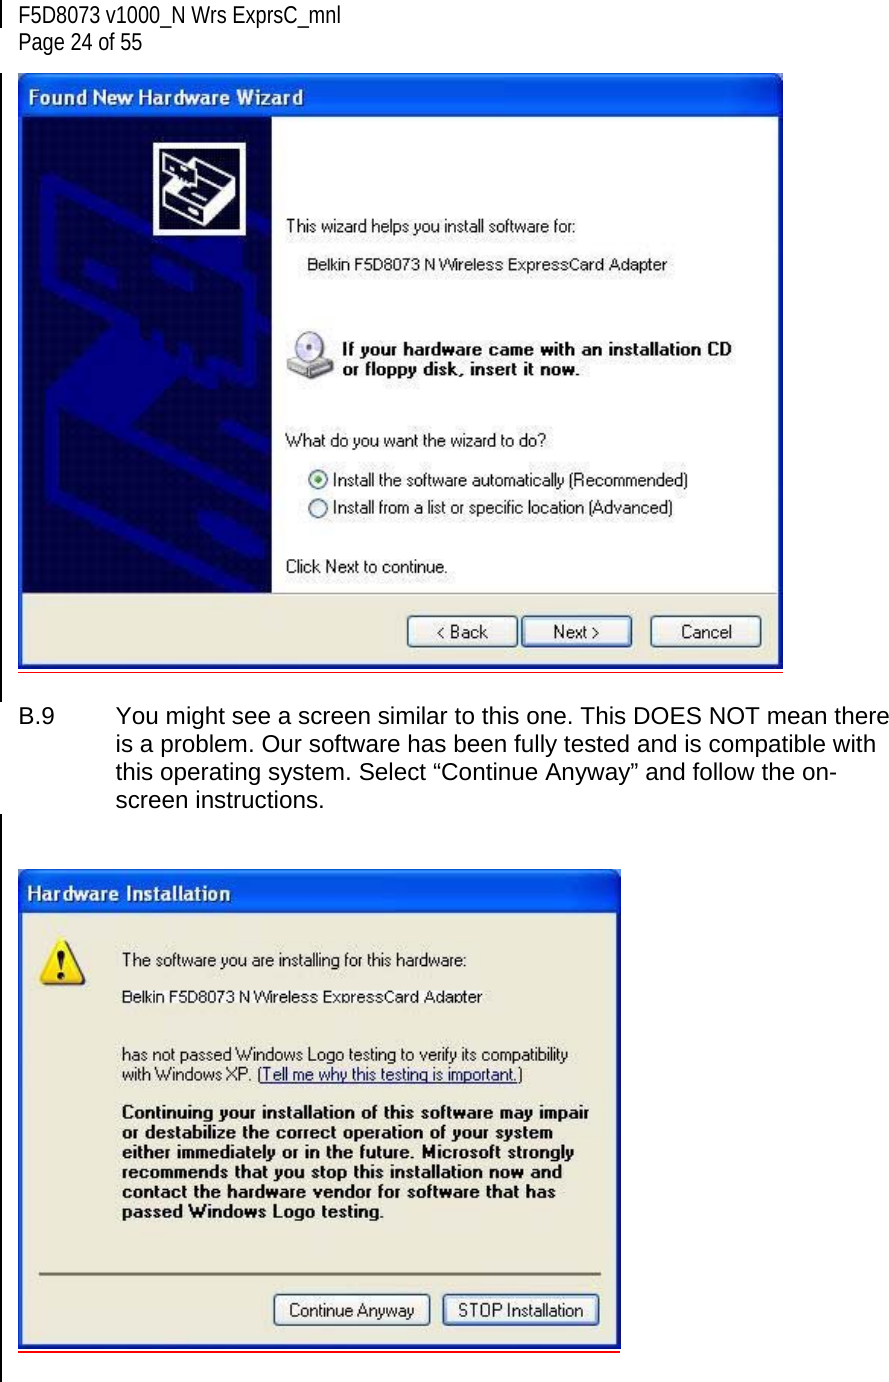 F5D8073 v1000_N Wrs ExprsC_mnl  Page 24 of 55   B.9  You might see a screen similar to this one. This DOES NOT mean there is a problem. Our software has been fully tested and is compatible with this operating system. Select “Continue Anyway” and follow the on-screen instructions.     